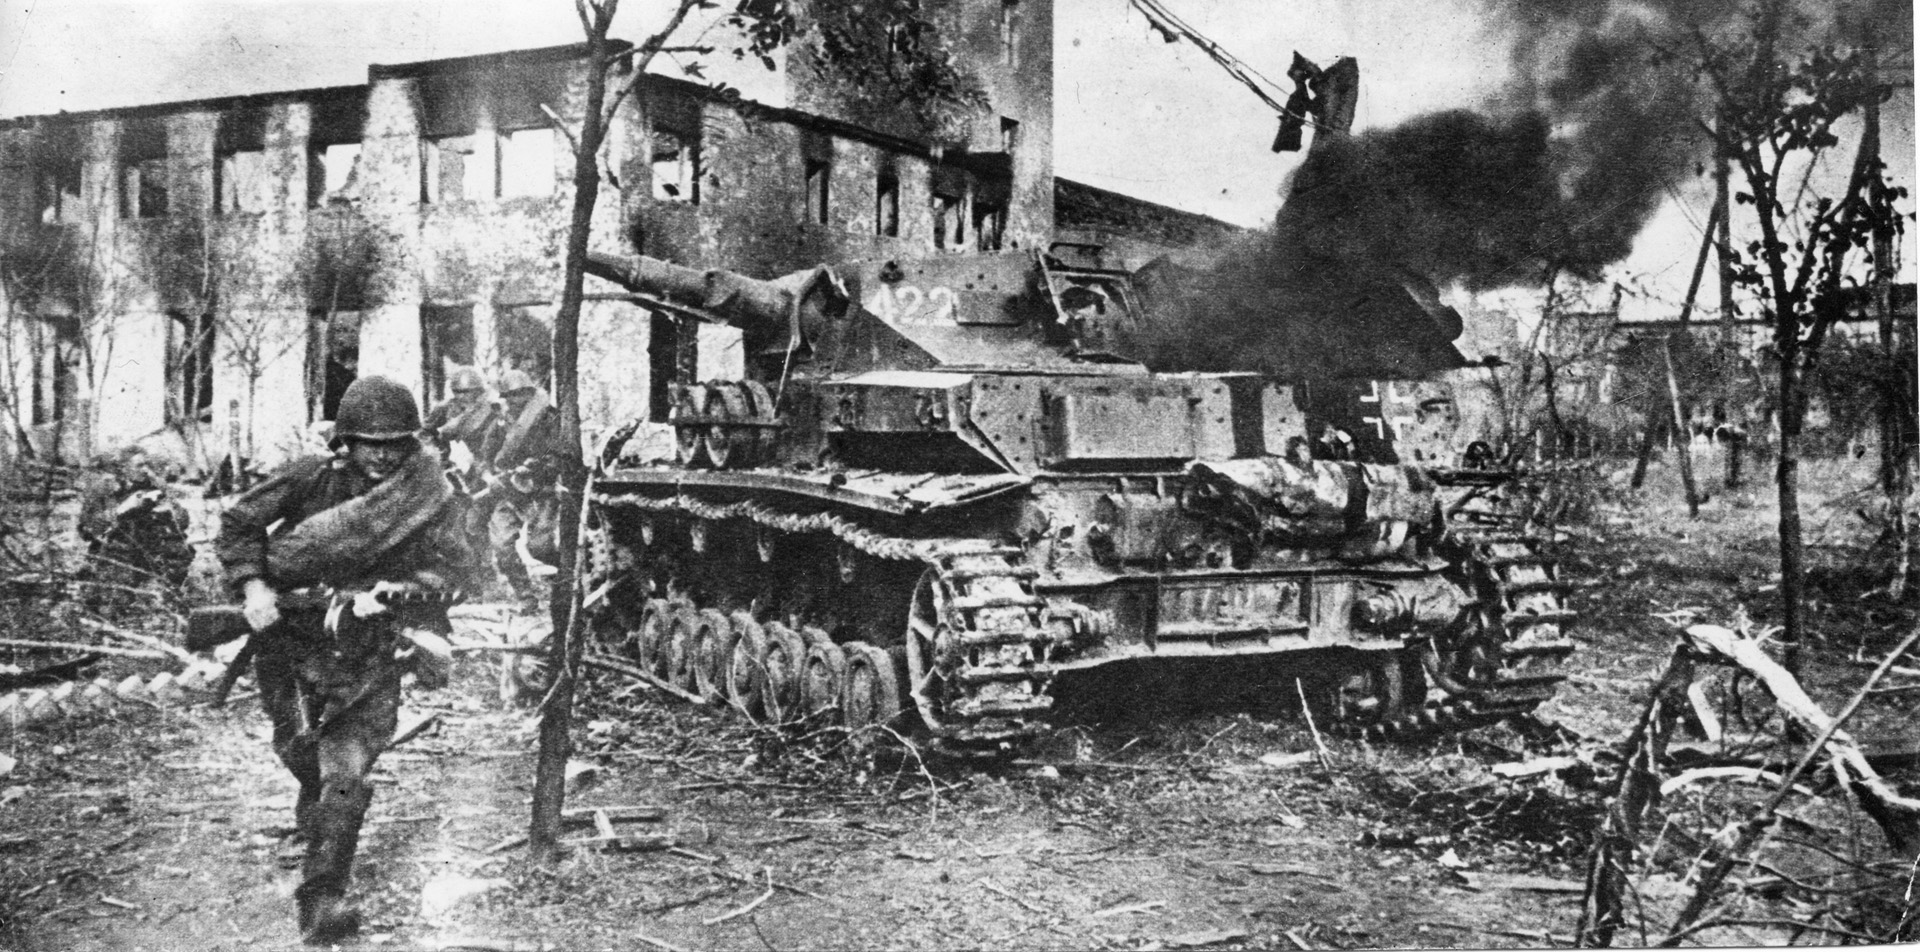 A Red Army soldier, with his comrades behind him, dashes past a knocked-out German Panzer IV during the German retreat from the Soviet Union. Casualties on both sides during the war were horrendous.